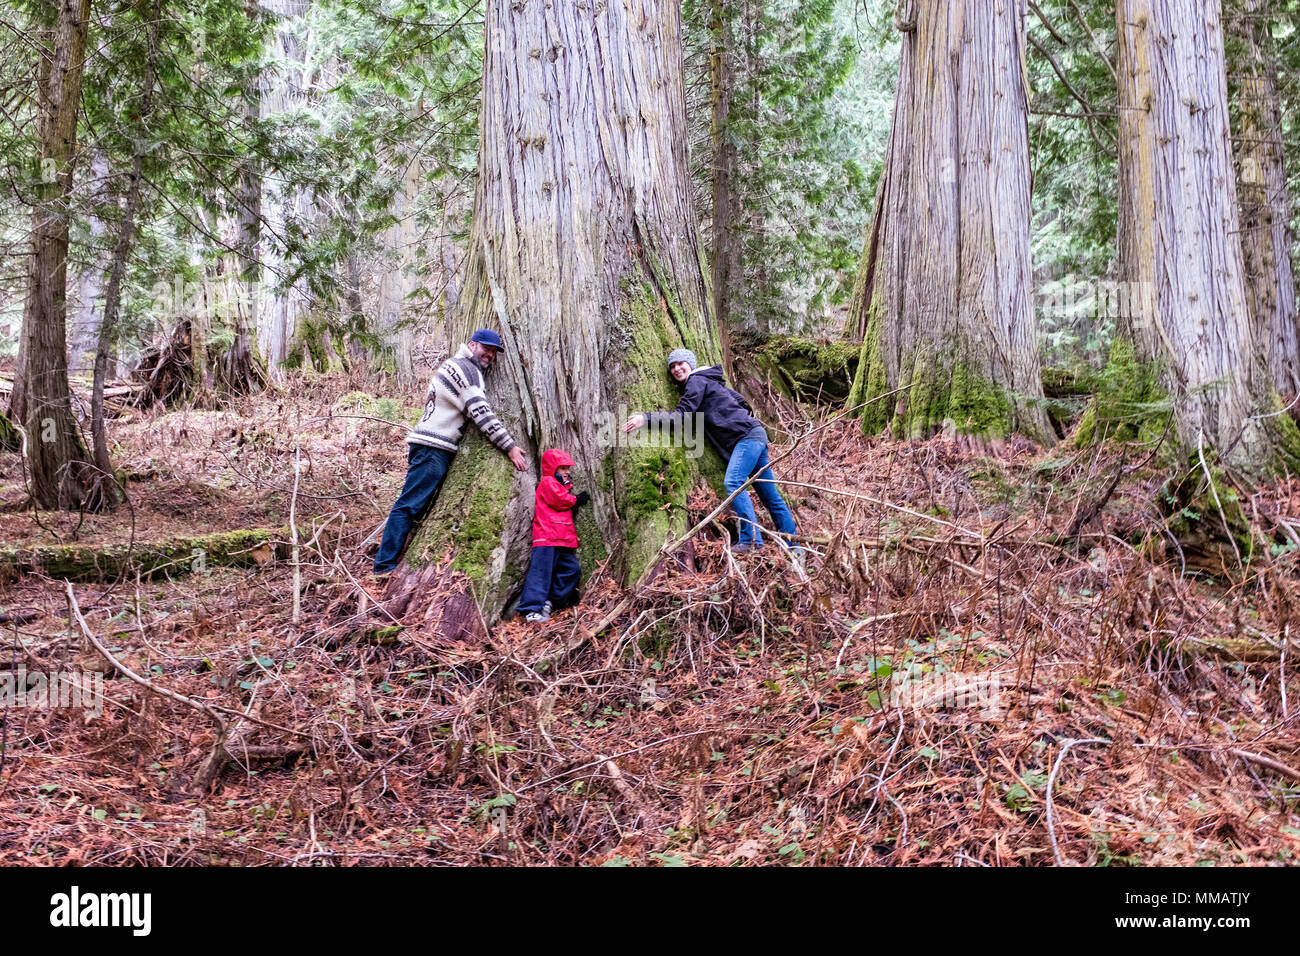 A man,woman, and child hug a western red cedar in the ancient forest in central British Columbia Stock Photo